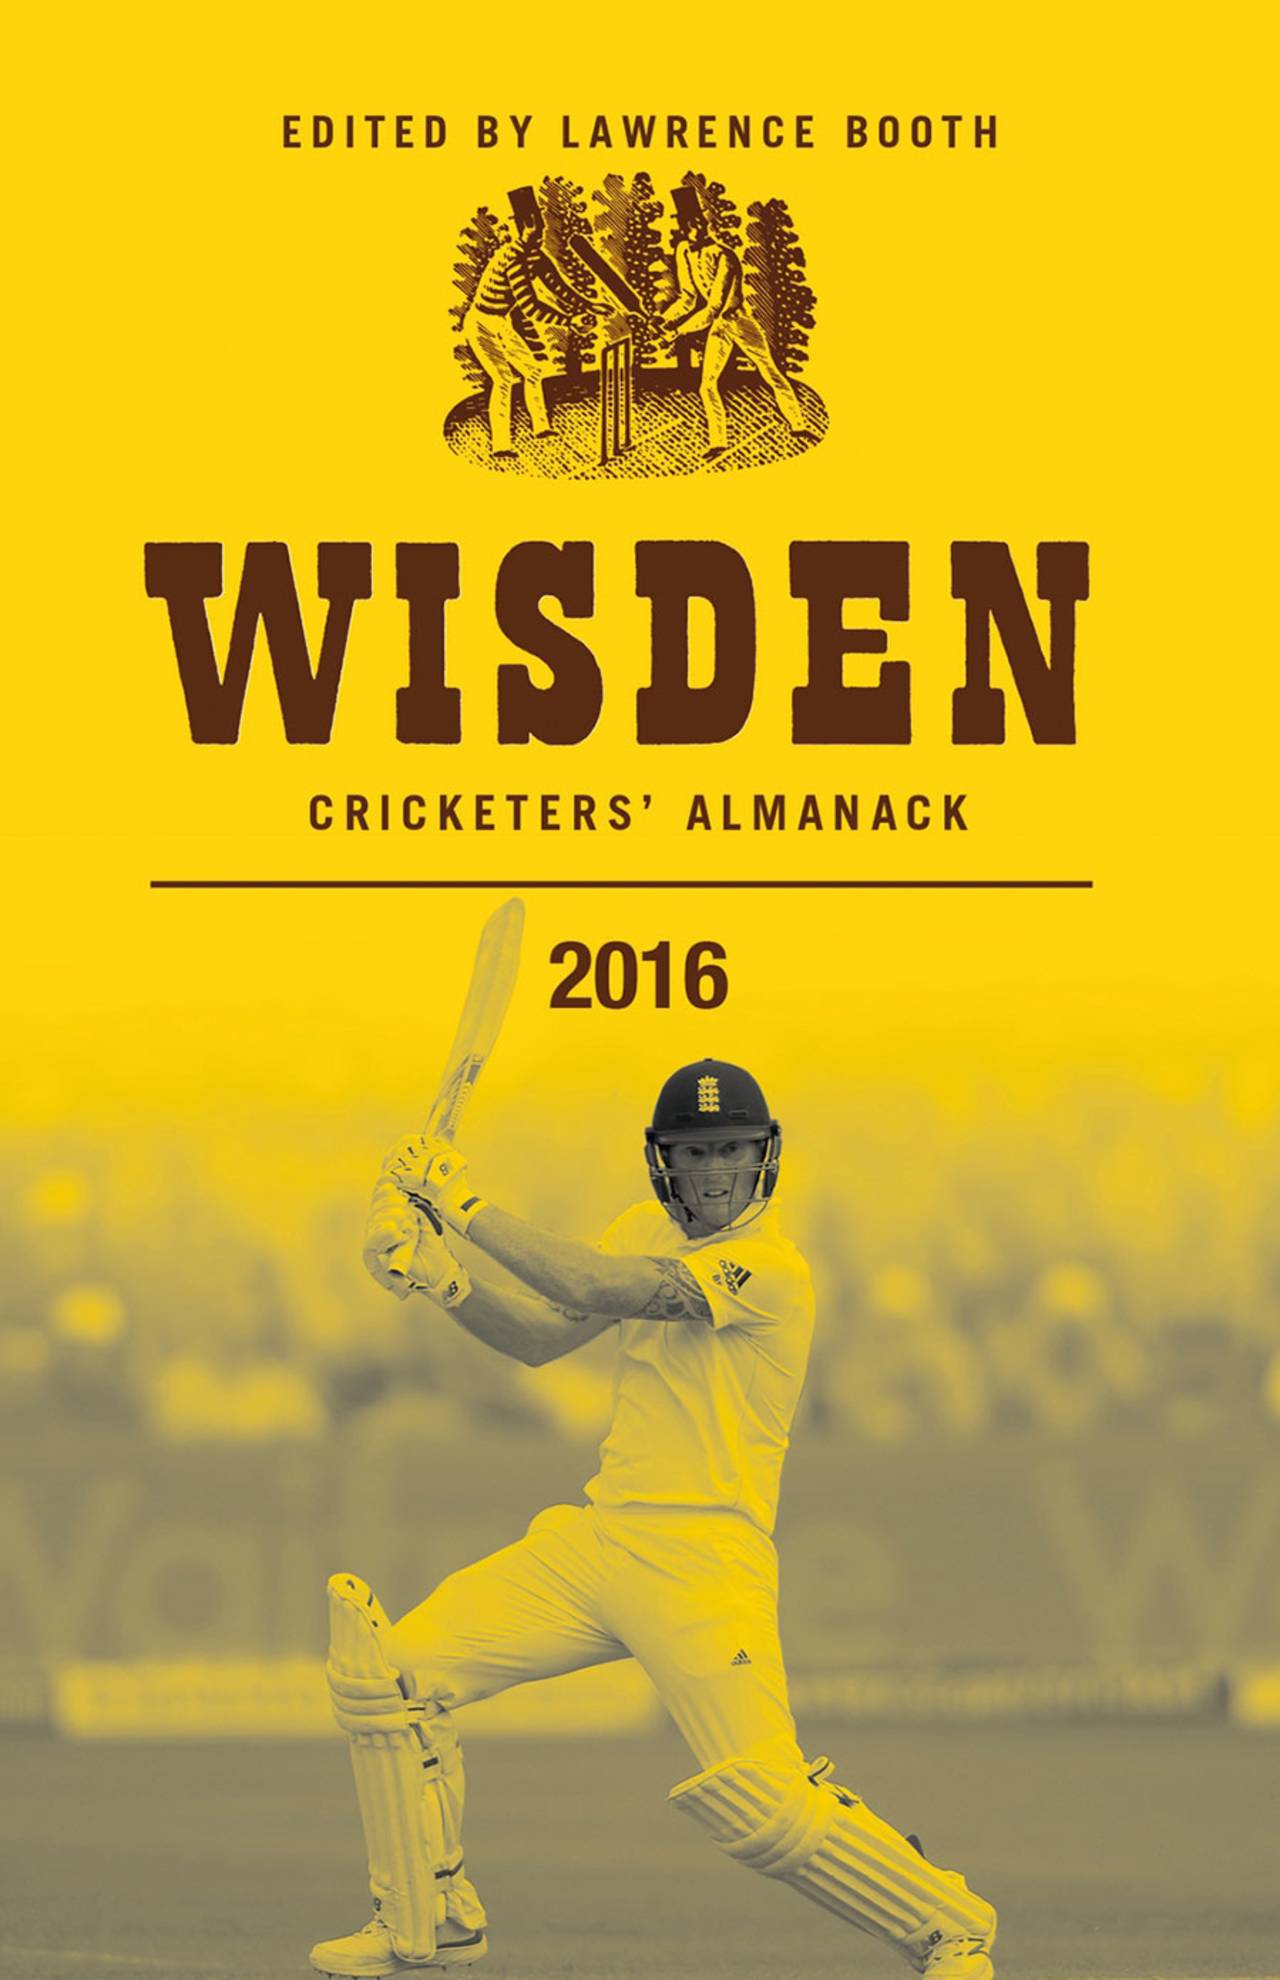 The cover of the 2016 Wisden Cricketers' Almanack